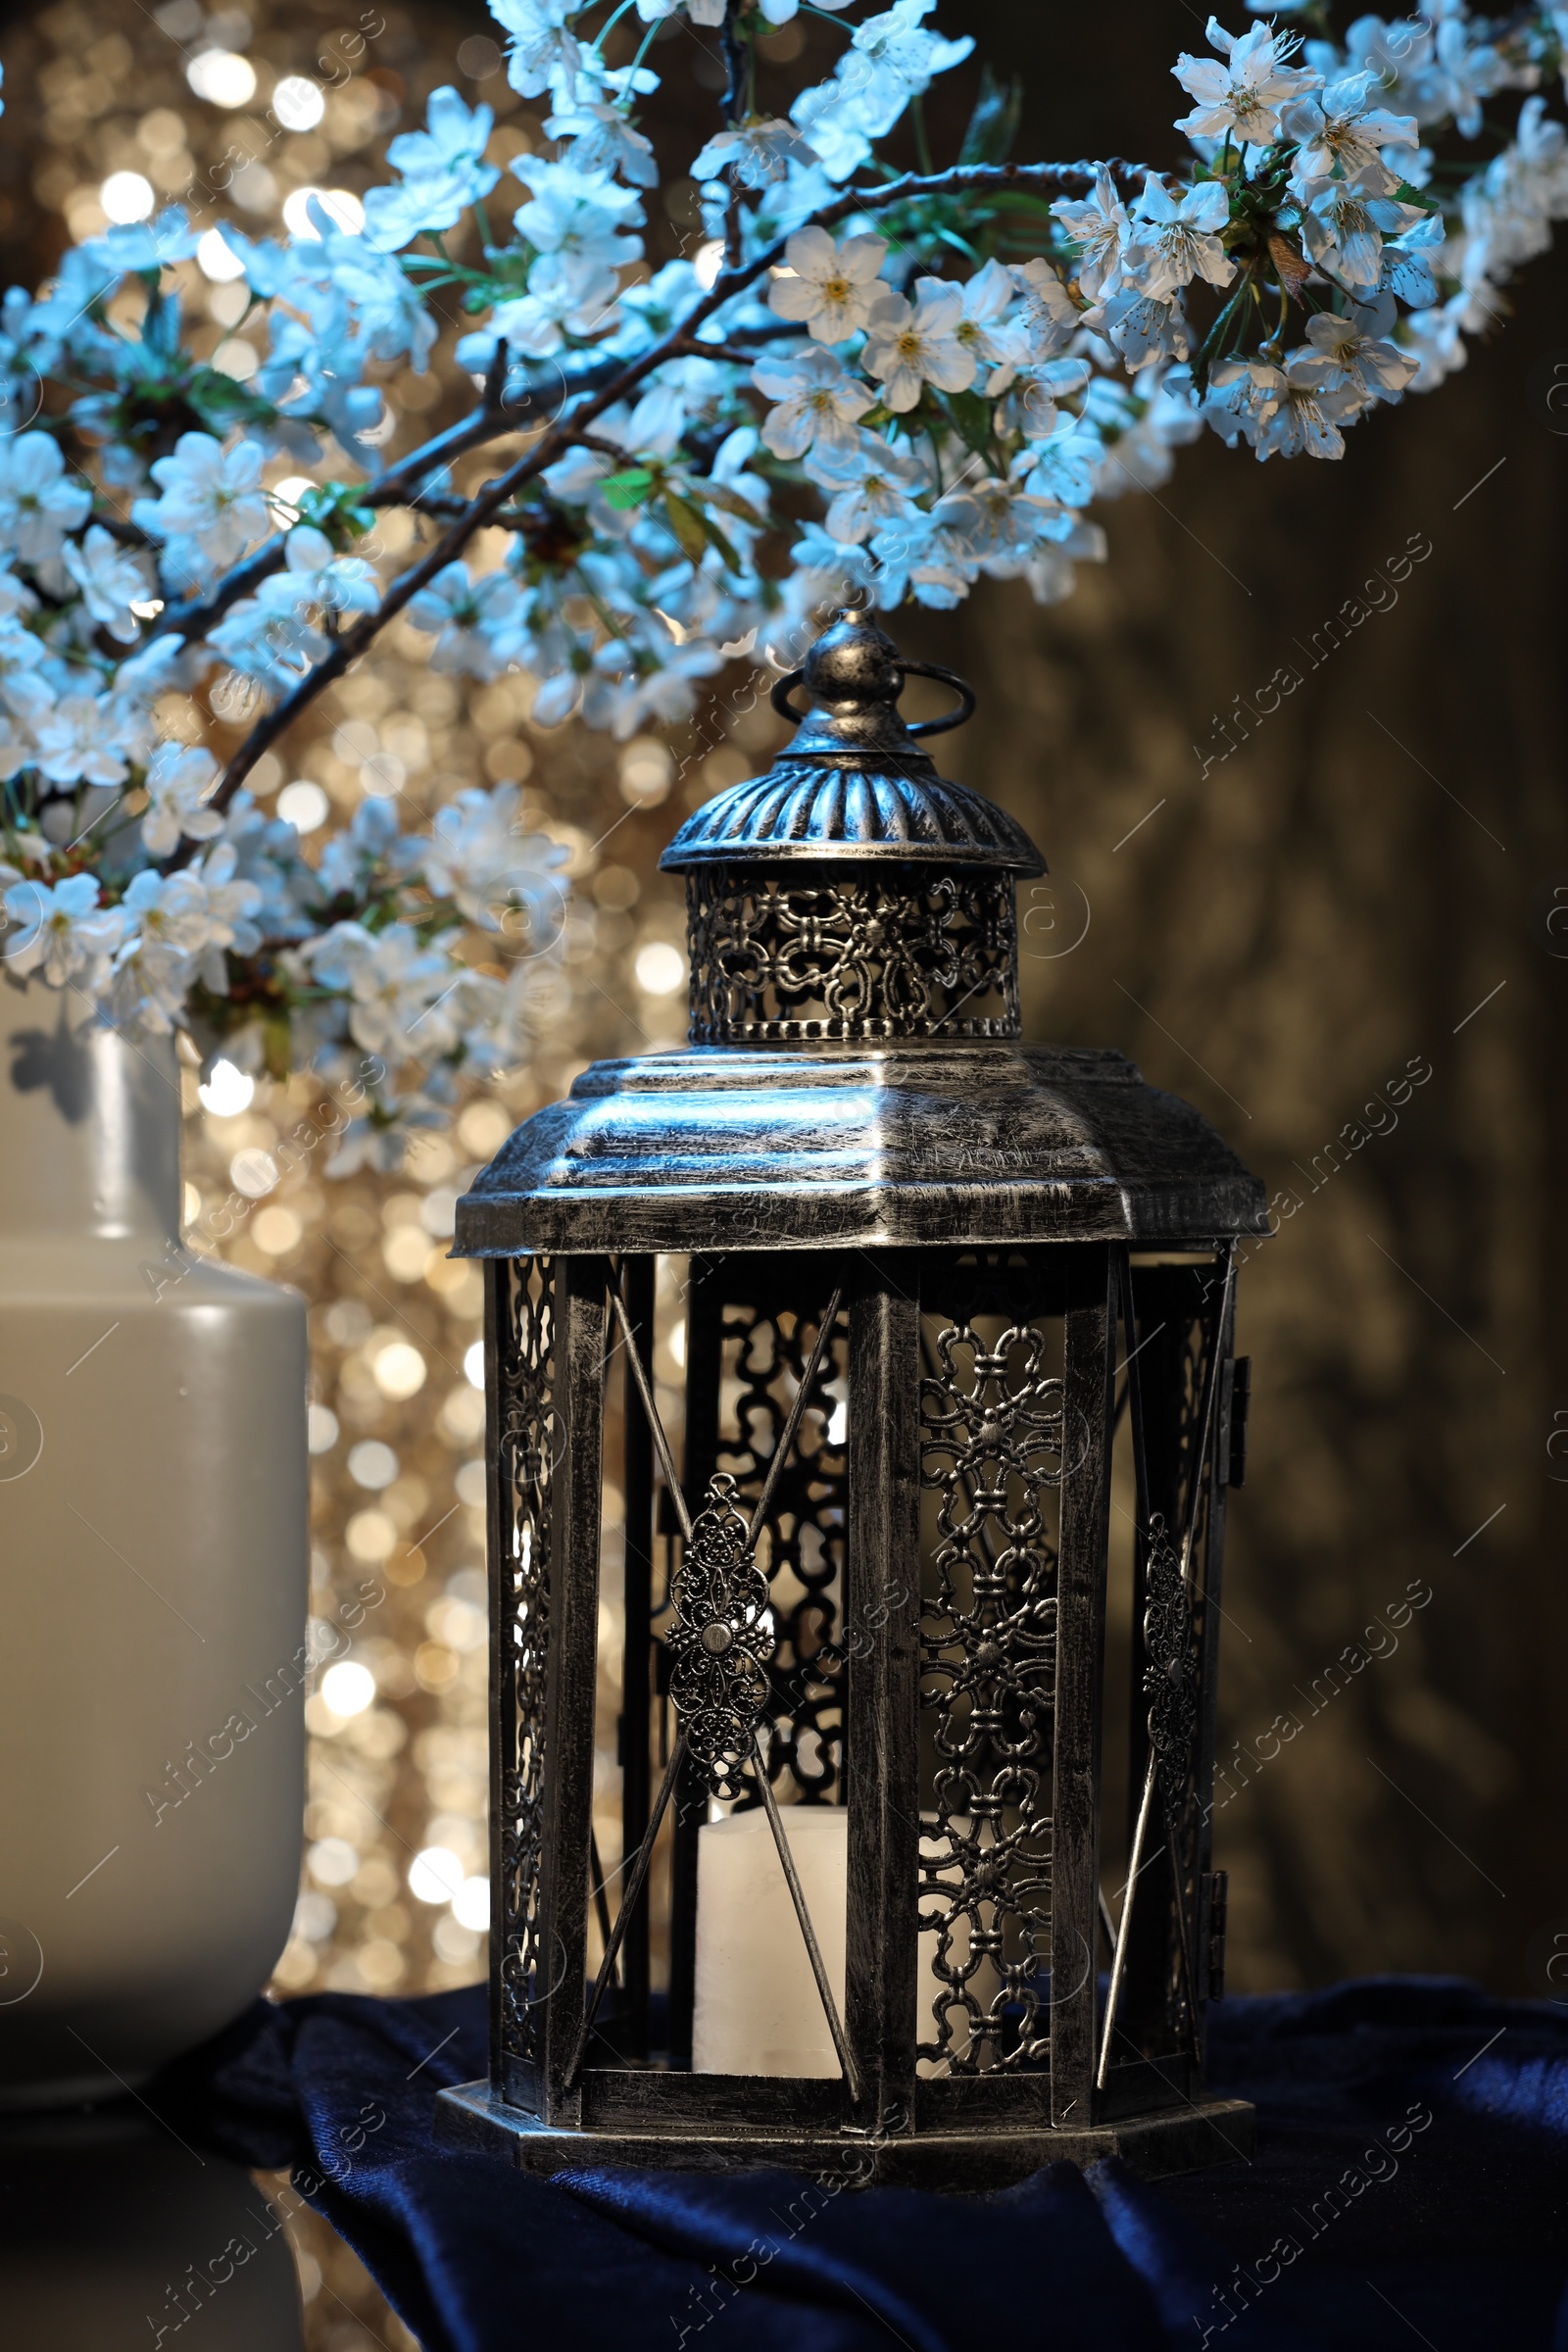 Photo of Arabic lantern and vase with flowers on table against blurred lights